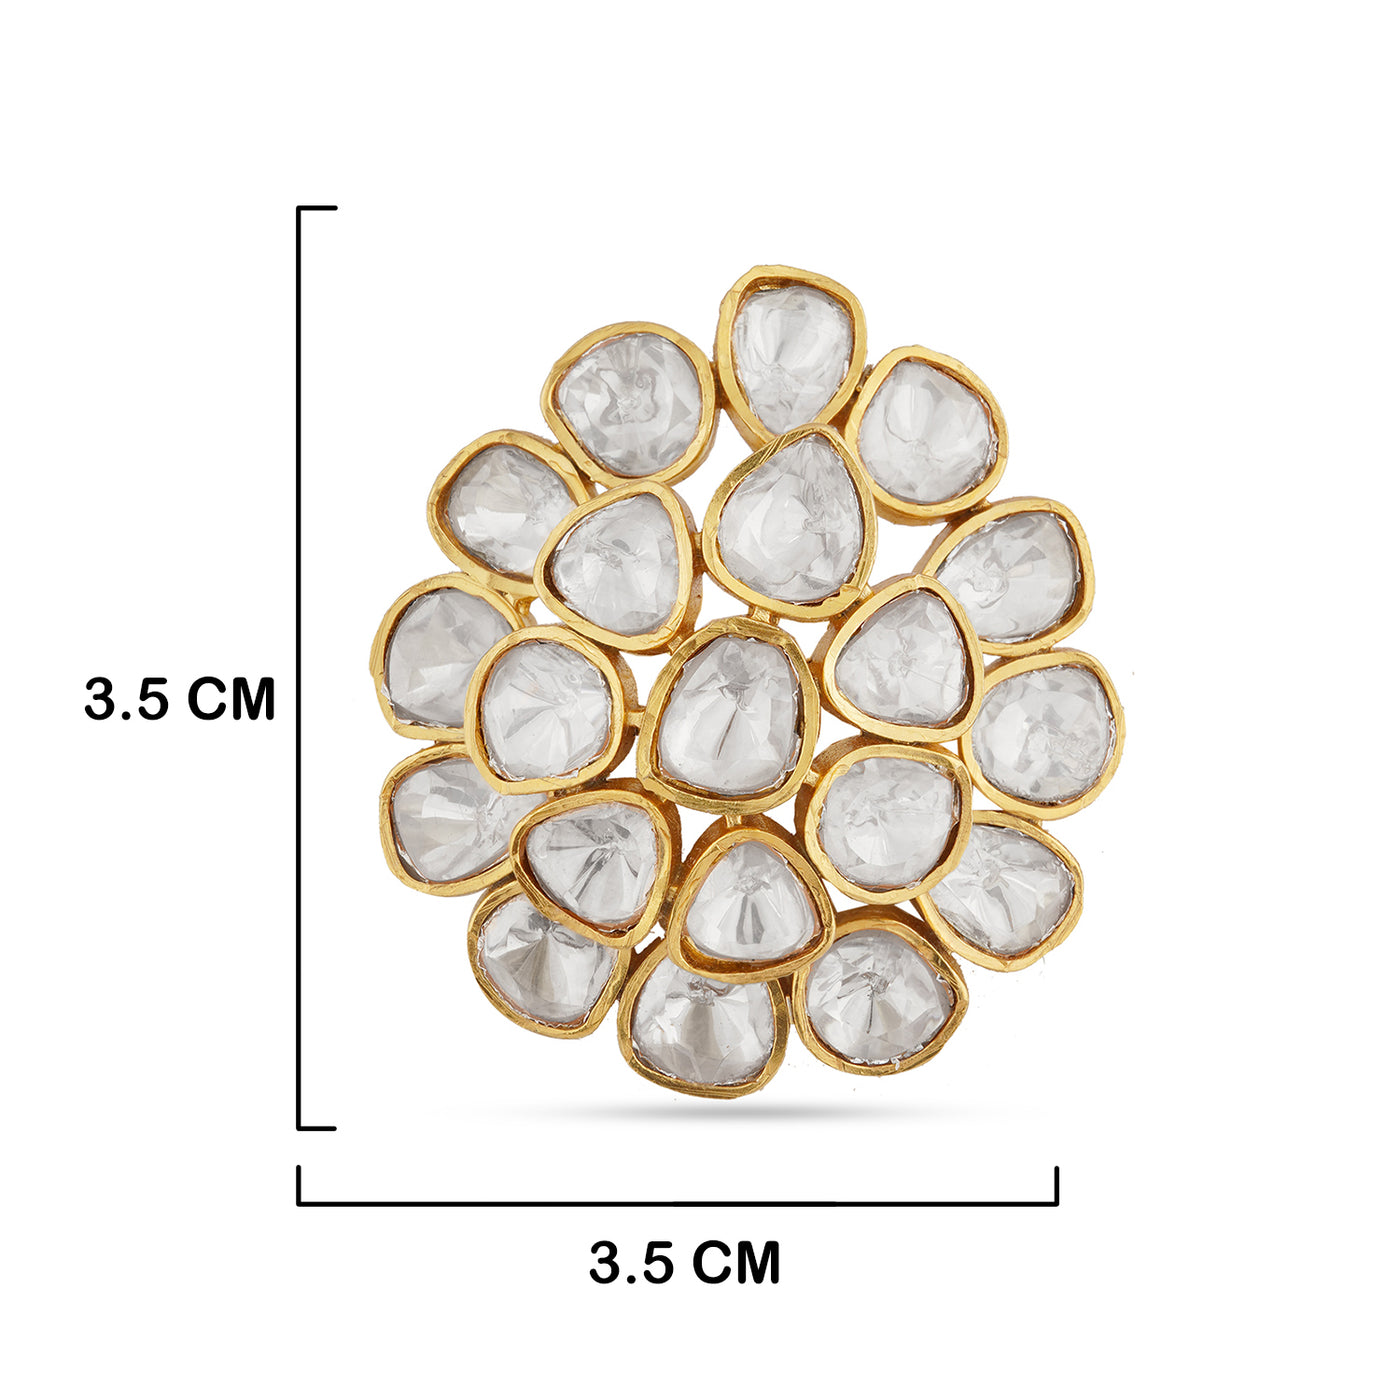 Kundan Studded Ring with measurements in cm. 3.5cm by 3.5cm.